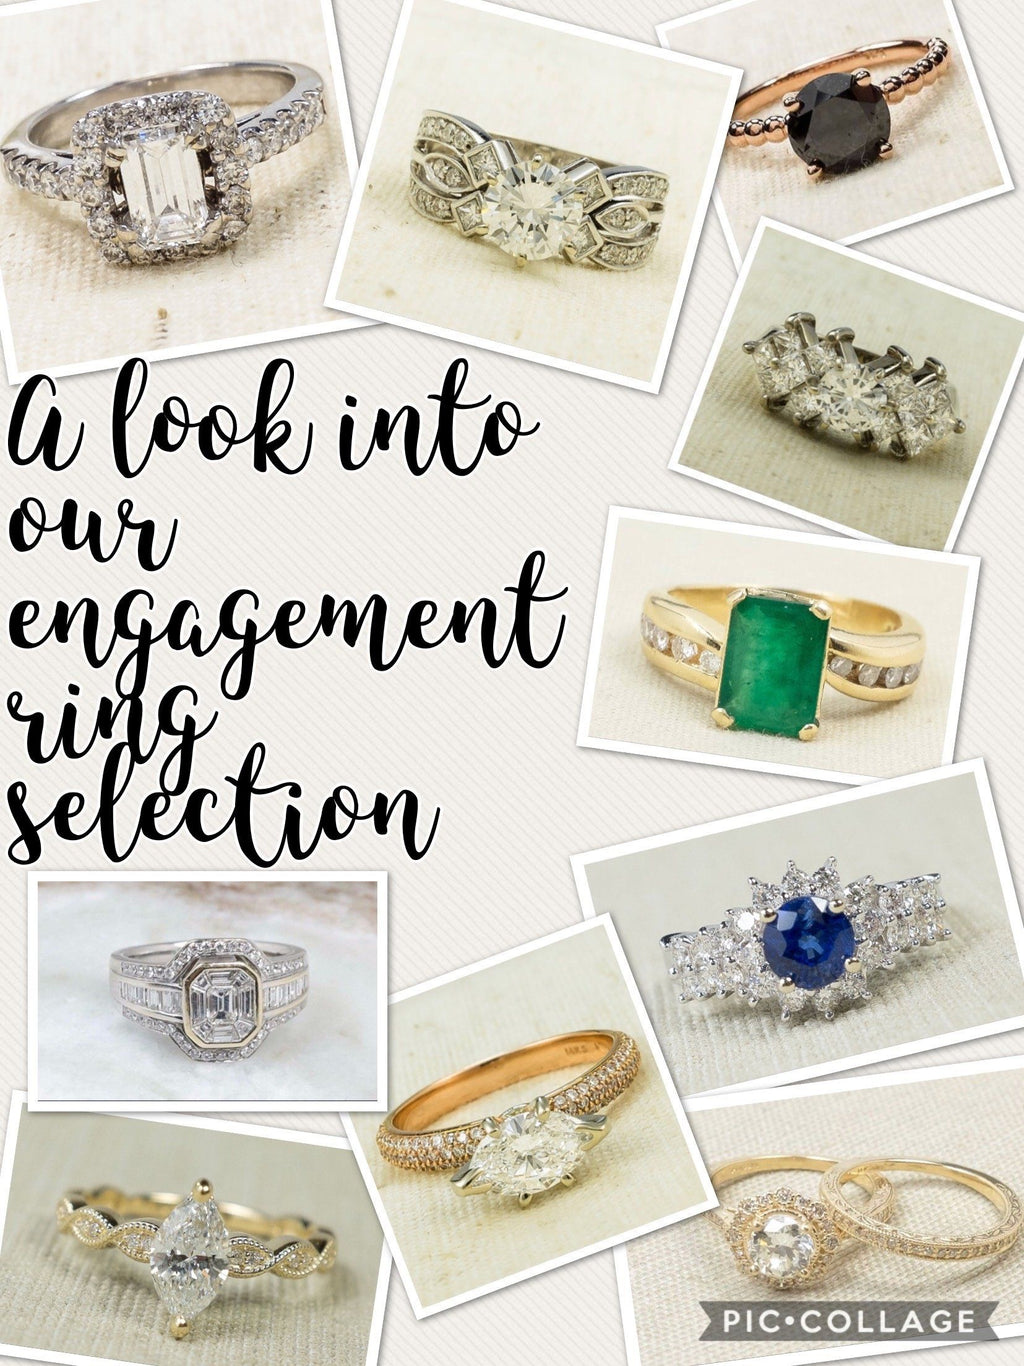 “Tis the season to say YES … a look into our engagement ring selection”